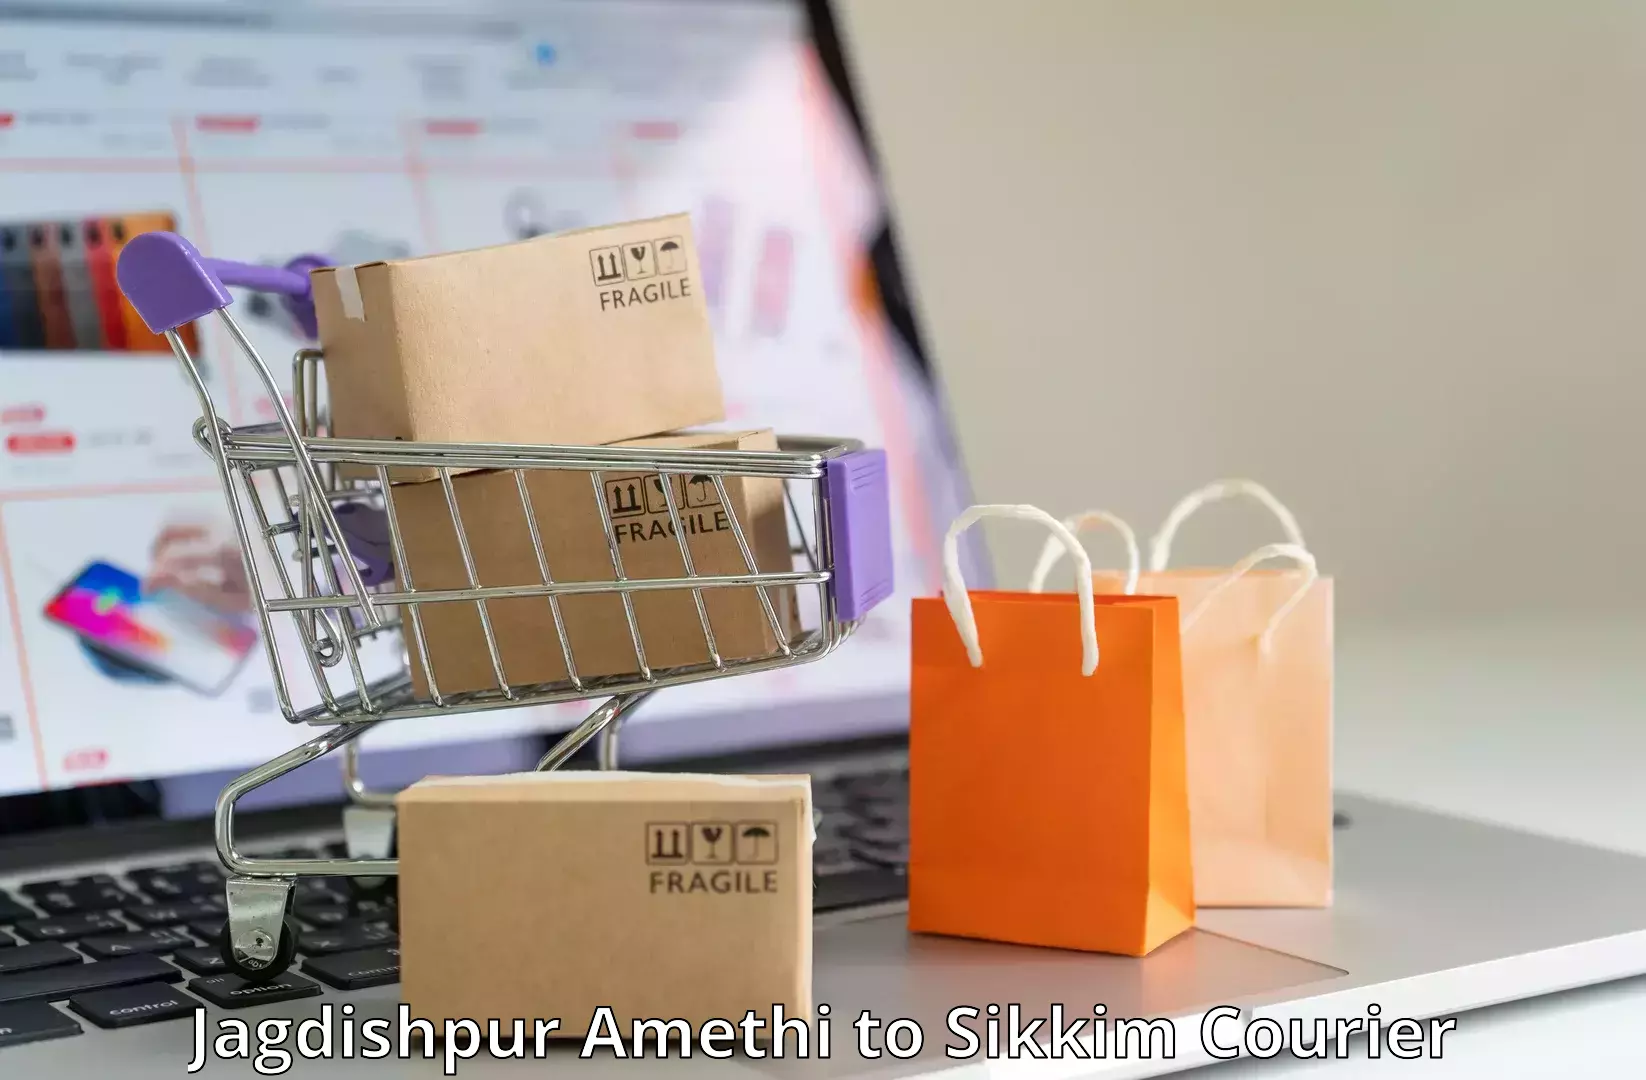 Efficient package consolidation Jagdishpur Amethi to East Sikkim